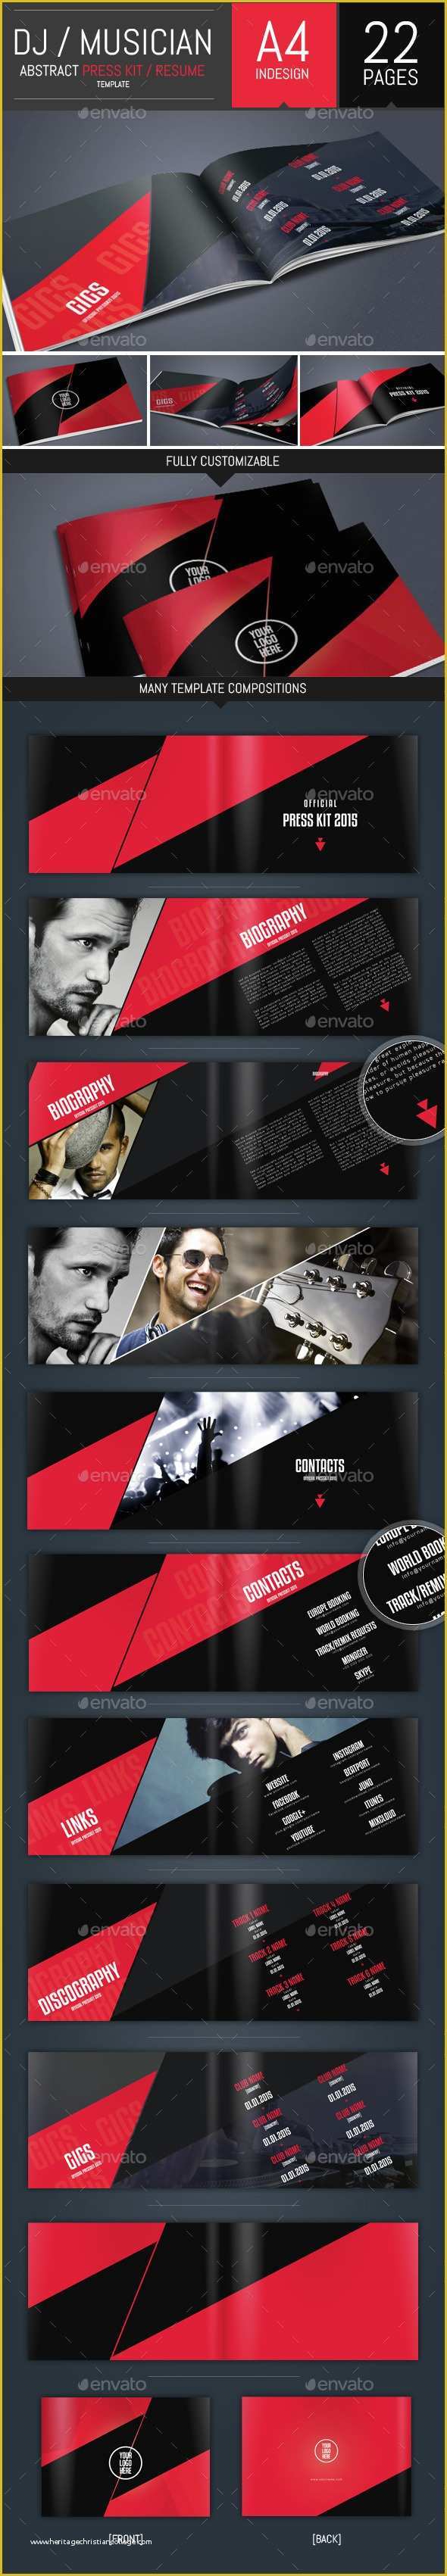 Musician Press Kit Template Free Of Dj and Musician Press Kit Resume Template by Dogmadesign